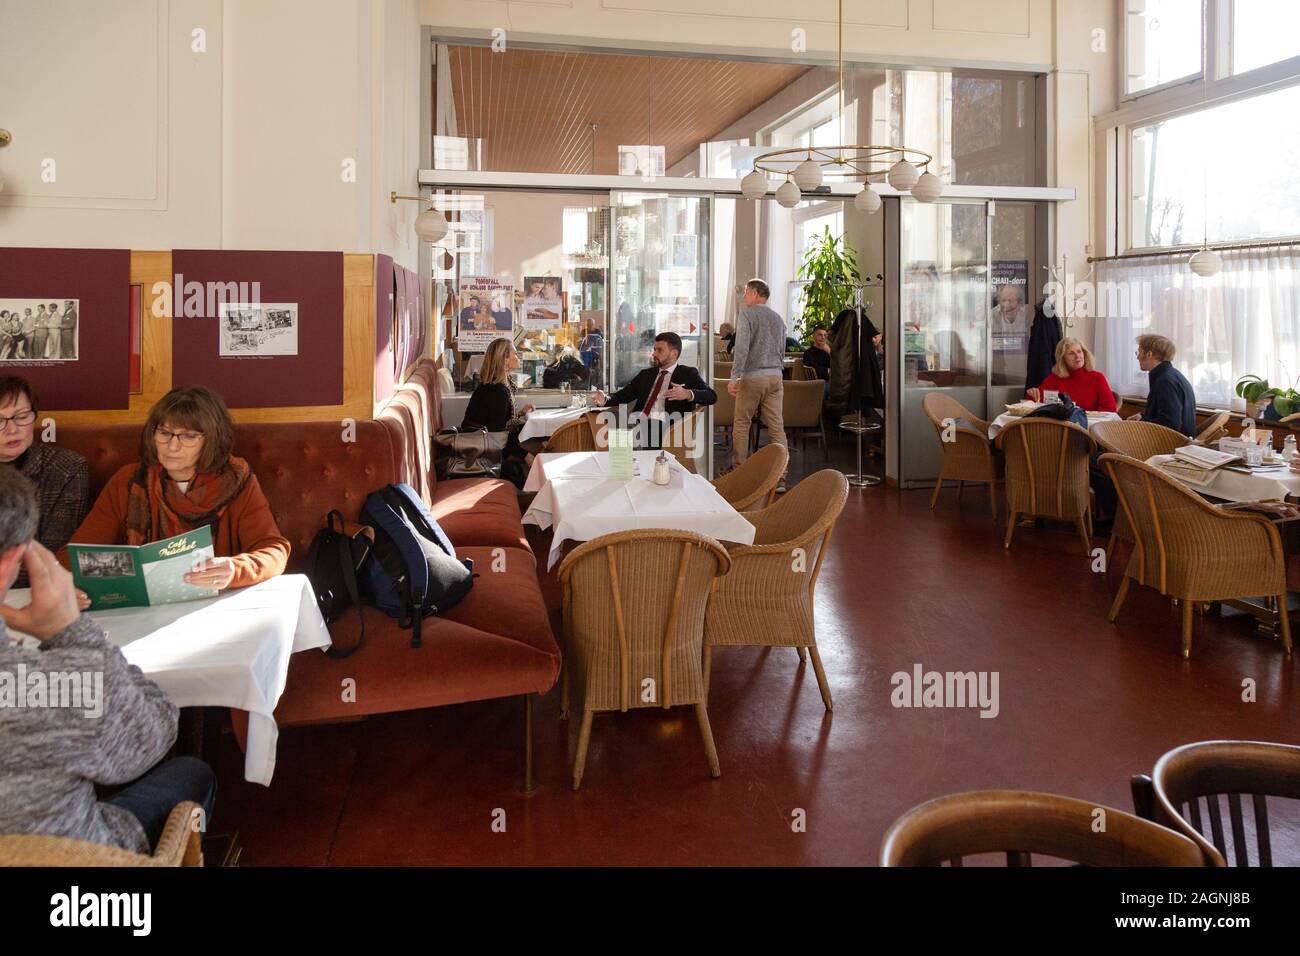 Cafe Pruckel, Vienna interior, people eating and drinking in one of the well known coffee houses of Vienna Austria Stock Photo